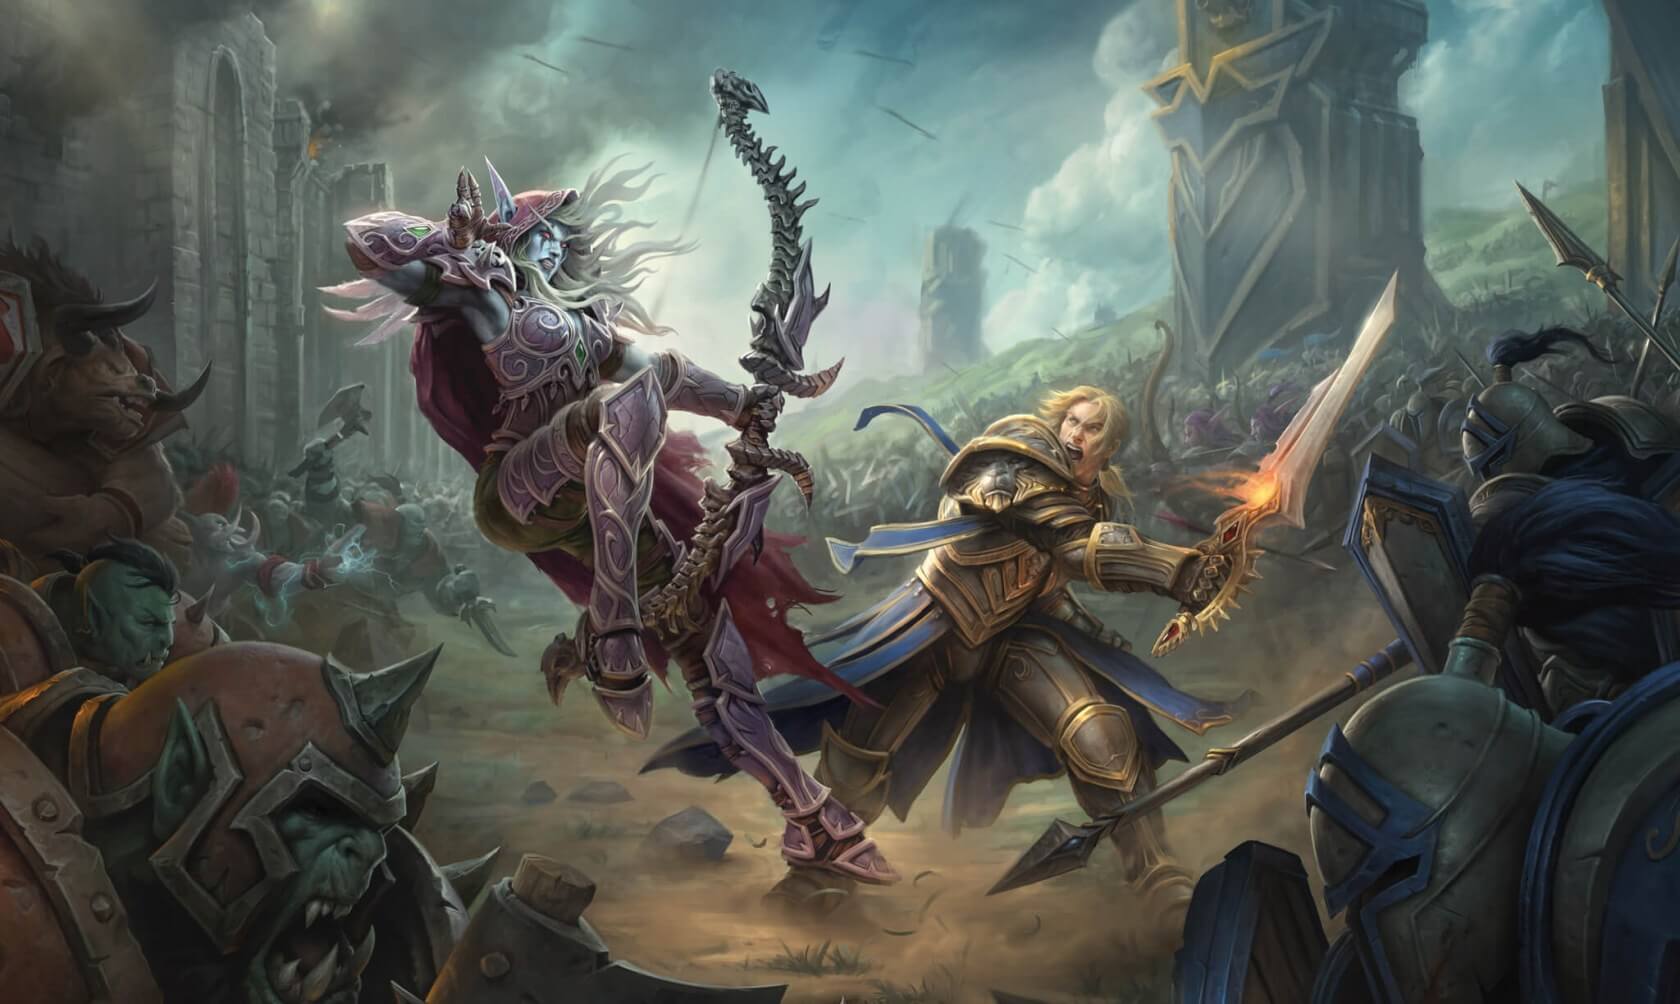 Battle for Azeroth breaks day-one sales records for any WoW expansion